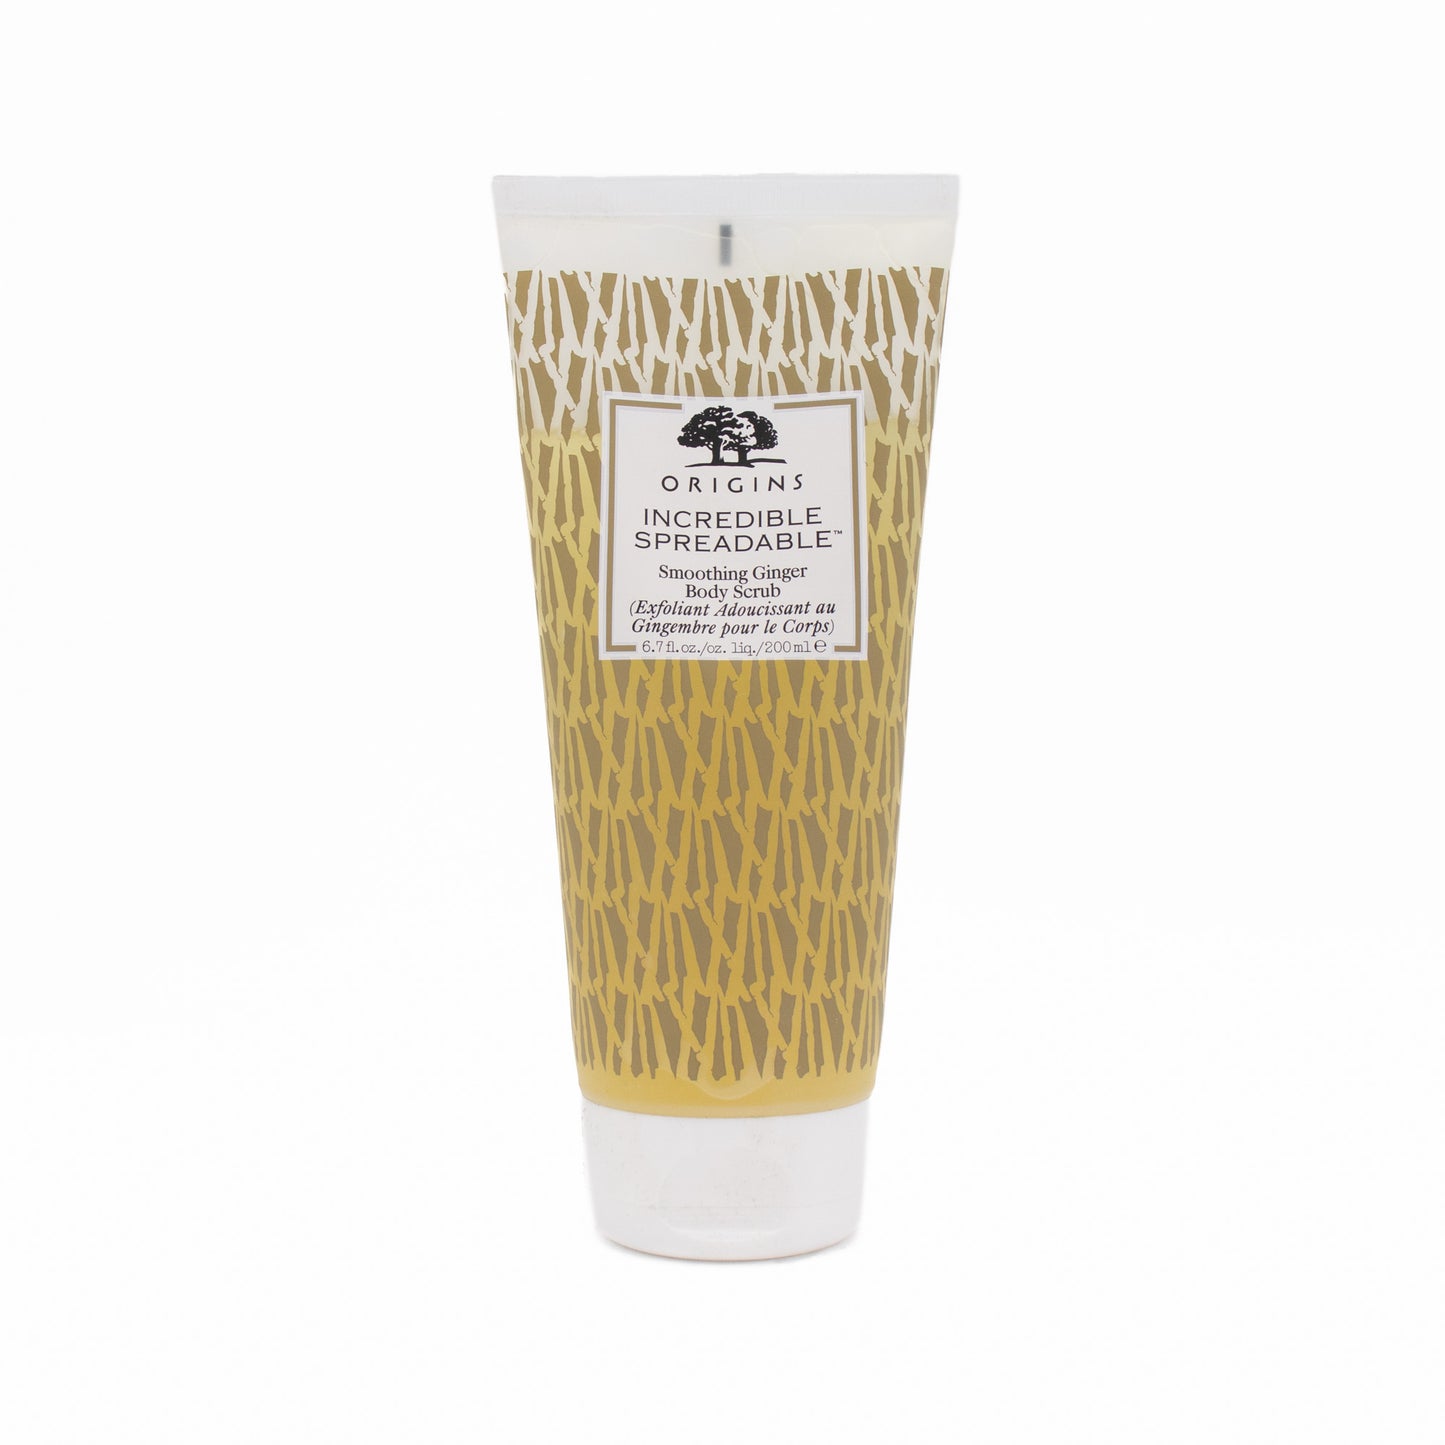 Origins Incredible Spreadable Ginger Body Scrub 200ml - Imperfect Container